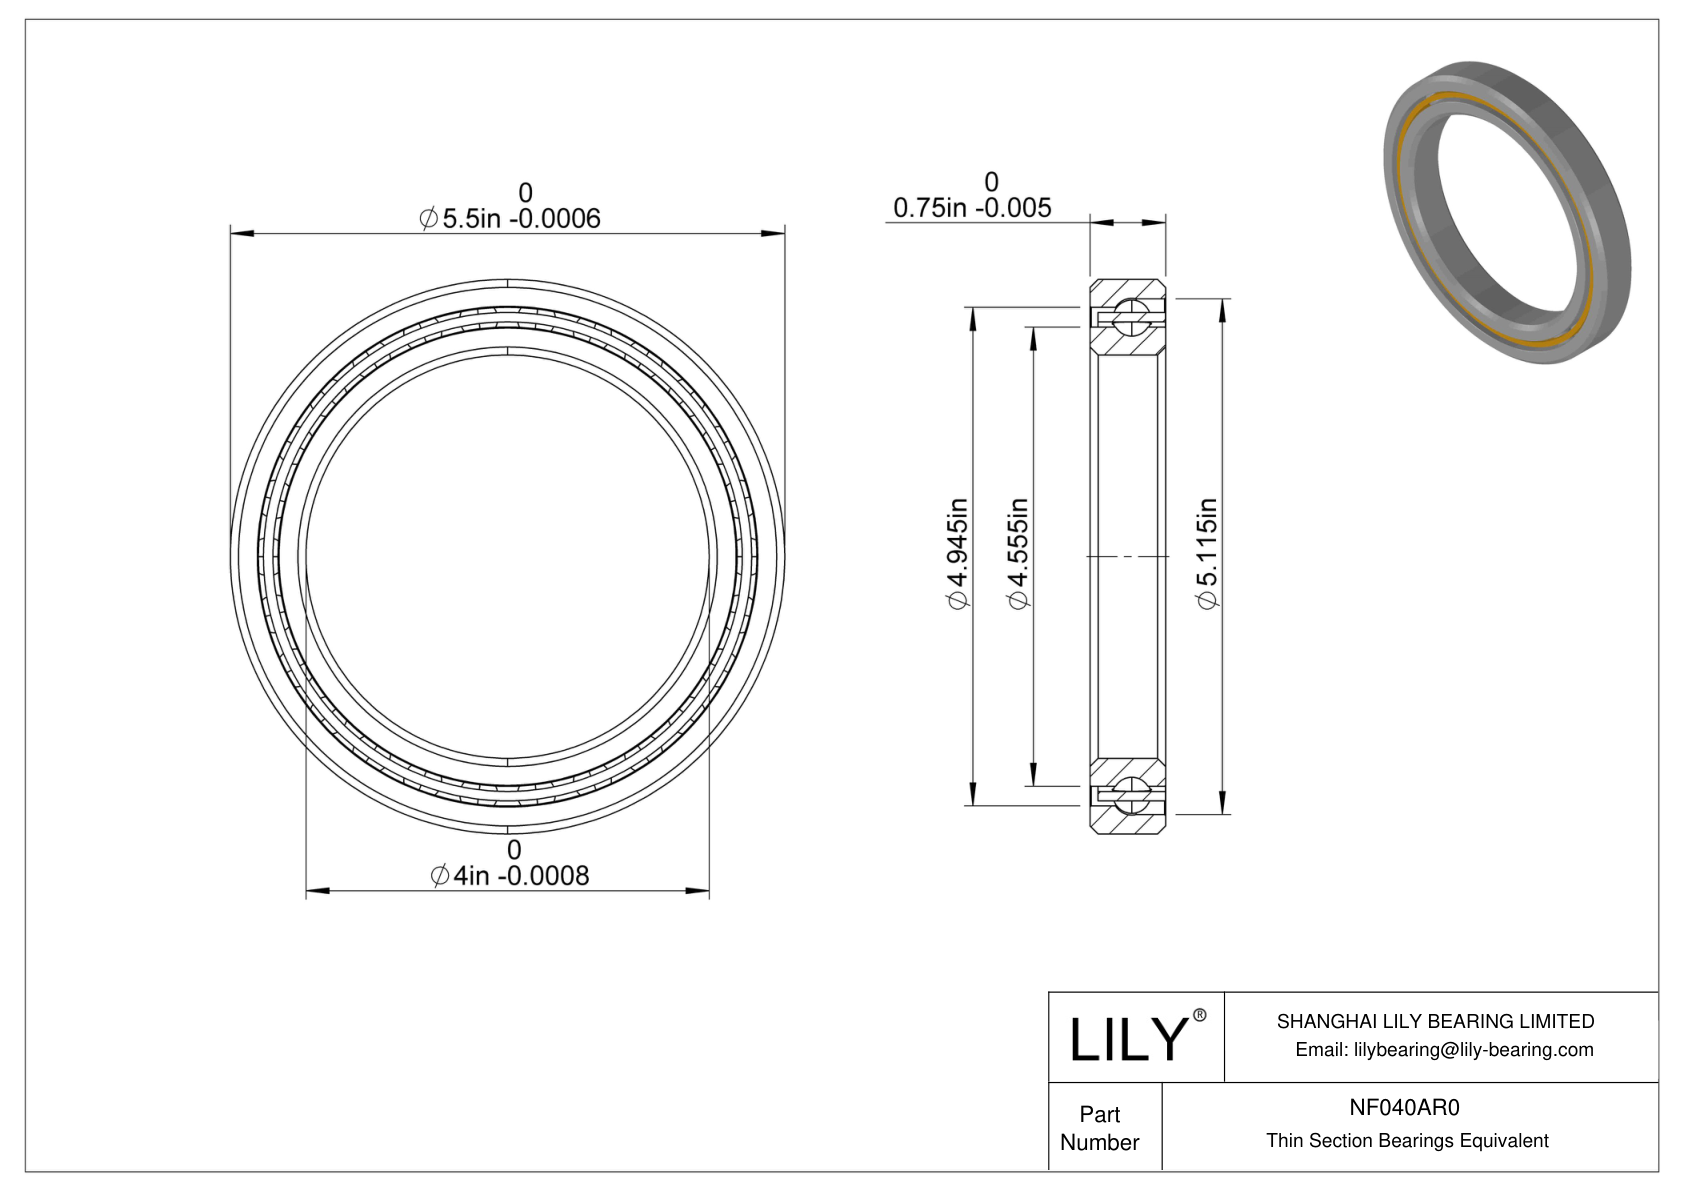 NF040AR0 Constant Section (CS) Bearings cad drawing